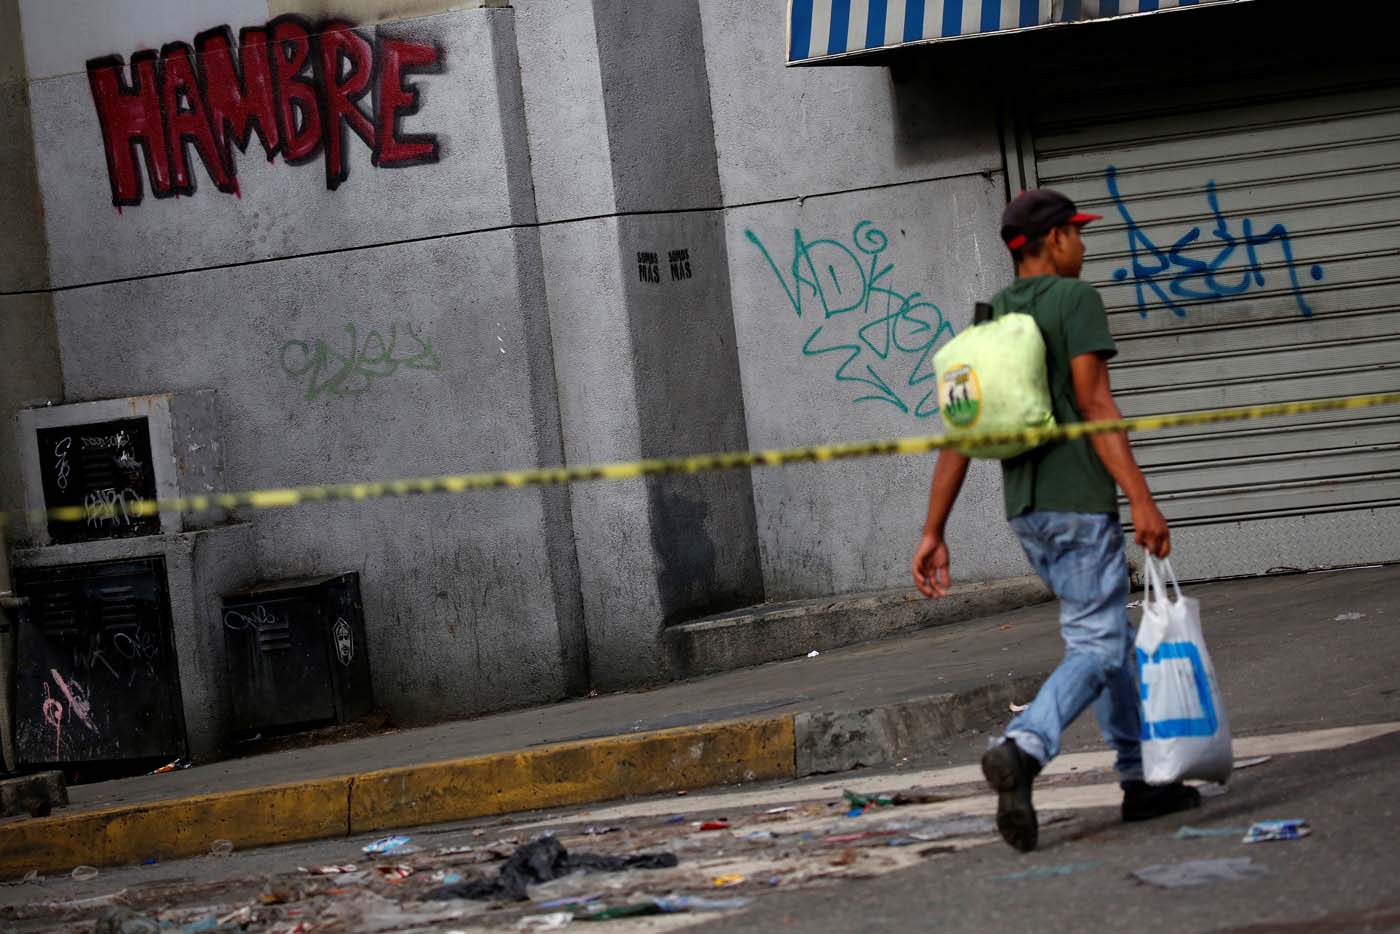 A man walks along a closed street near a graffiti that reads "hunger" during a strike called to protest against Venezuelan President Nicolas Maduro's government in Caracas, Venezuela, July 20, 2017. REUTERS/Carlos Garcia Rawlins